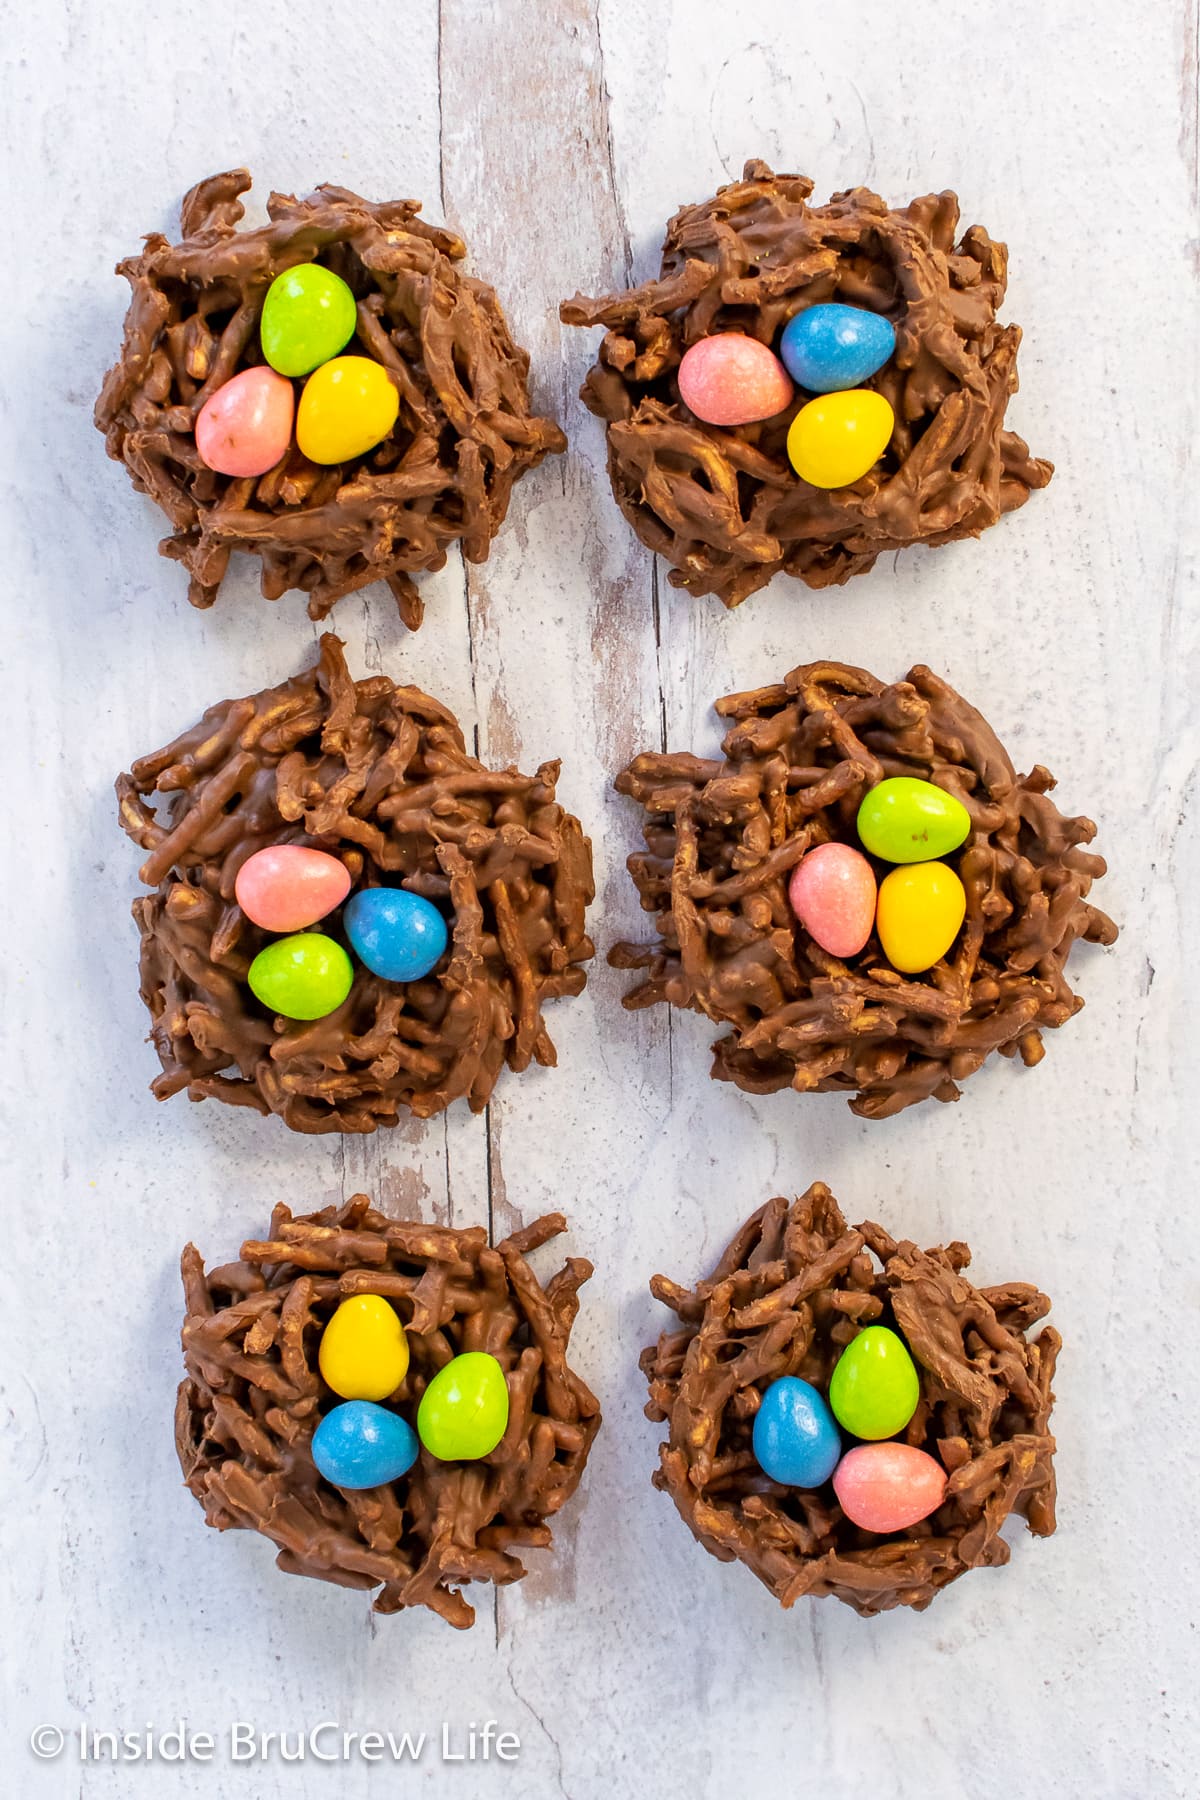 Six chocolate birds nest cookies with candy eggs in them.